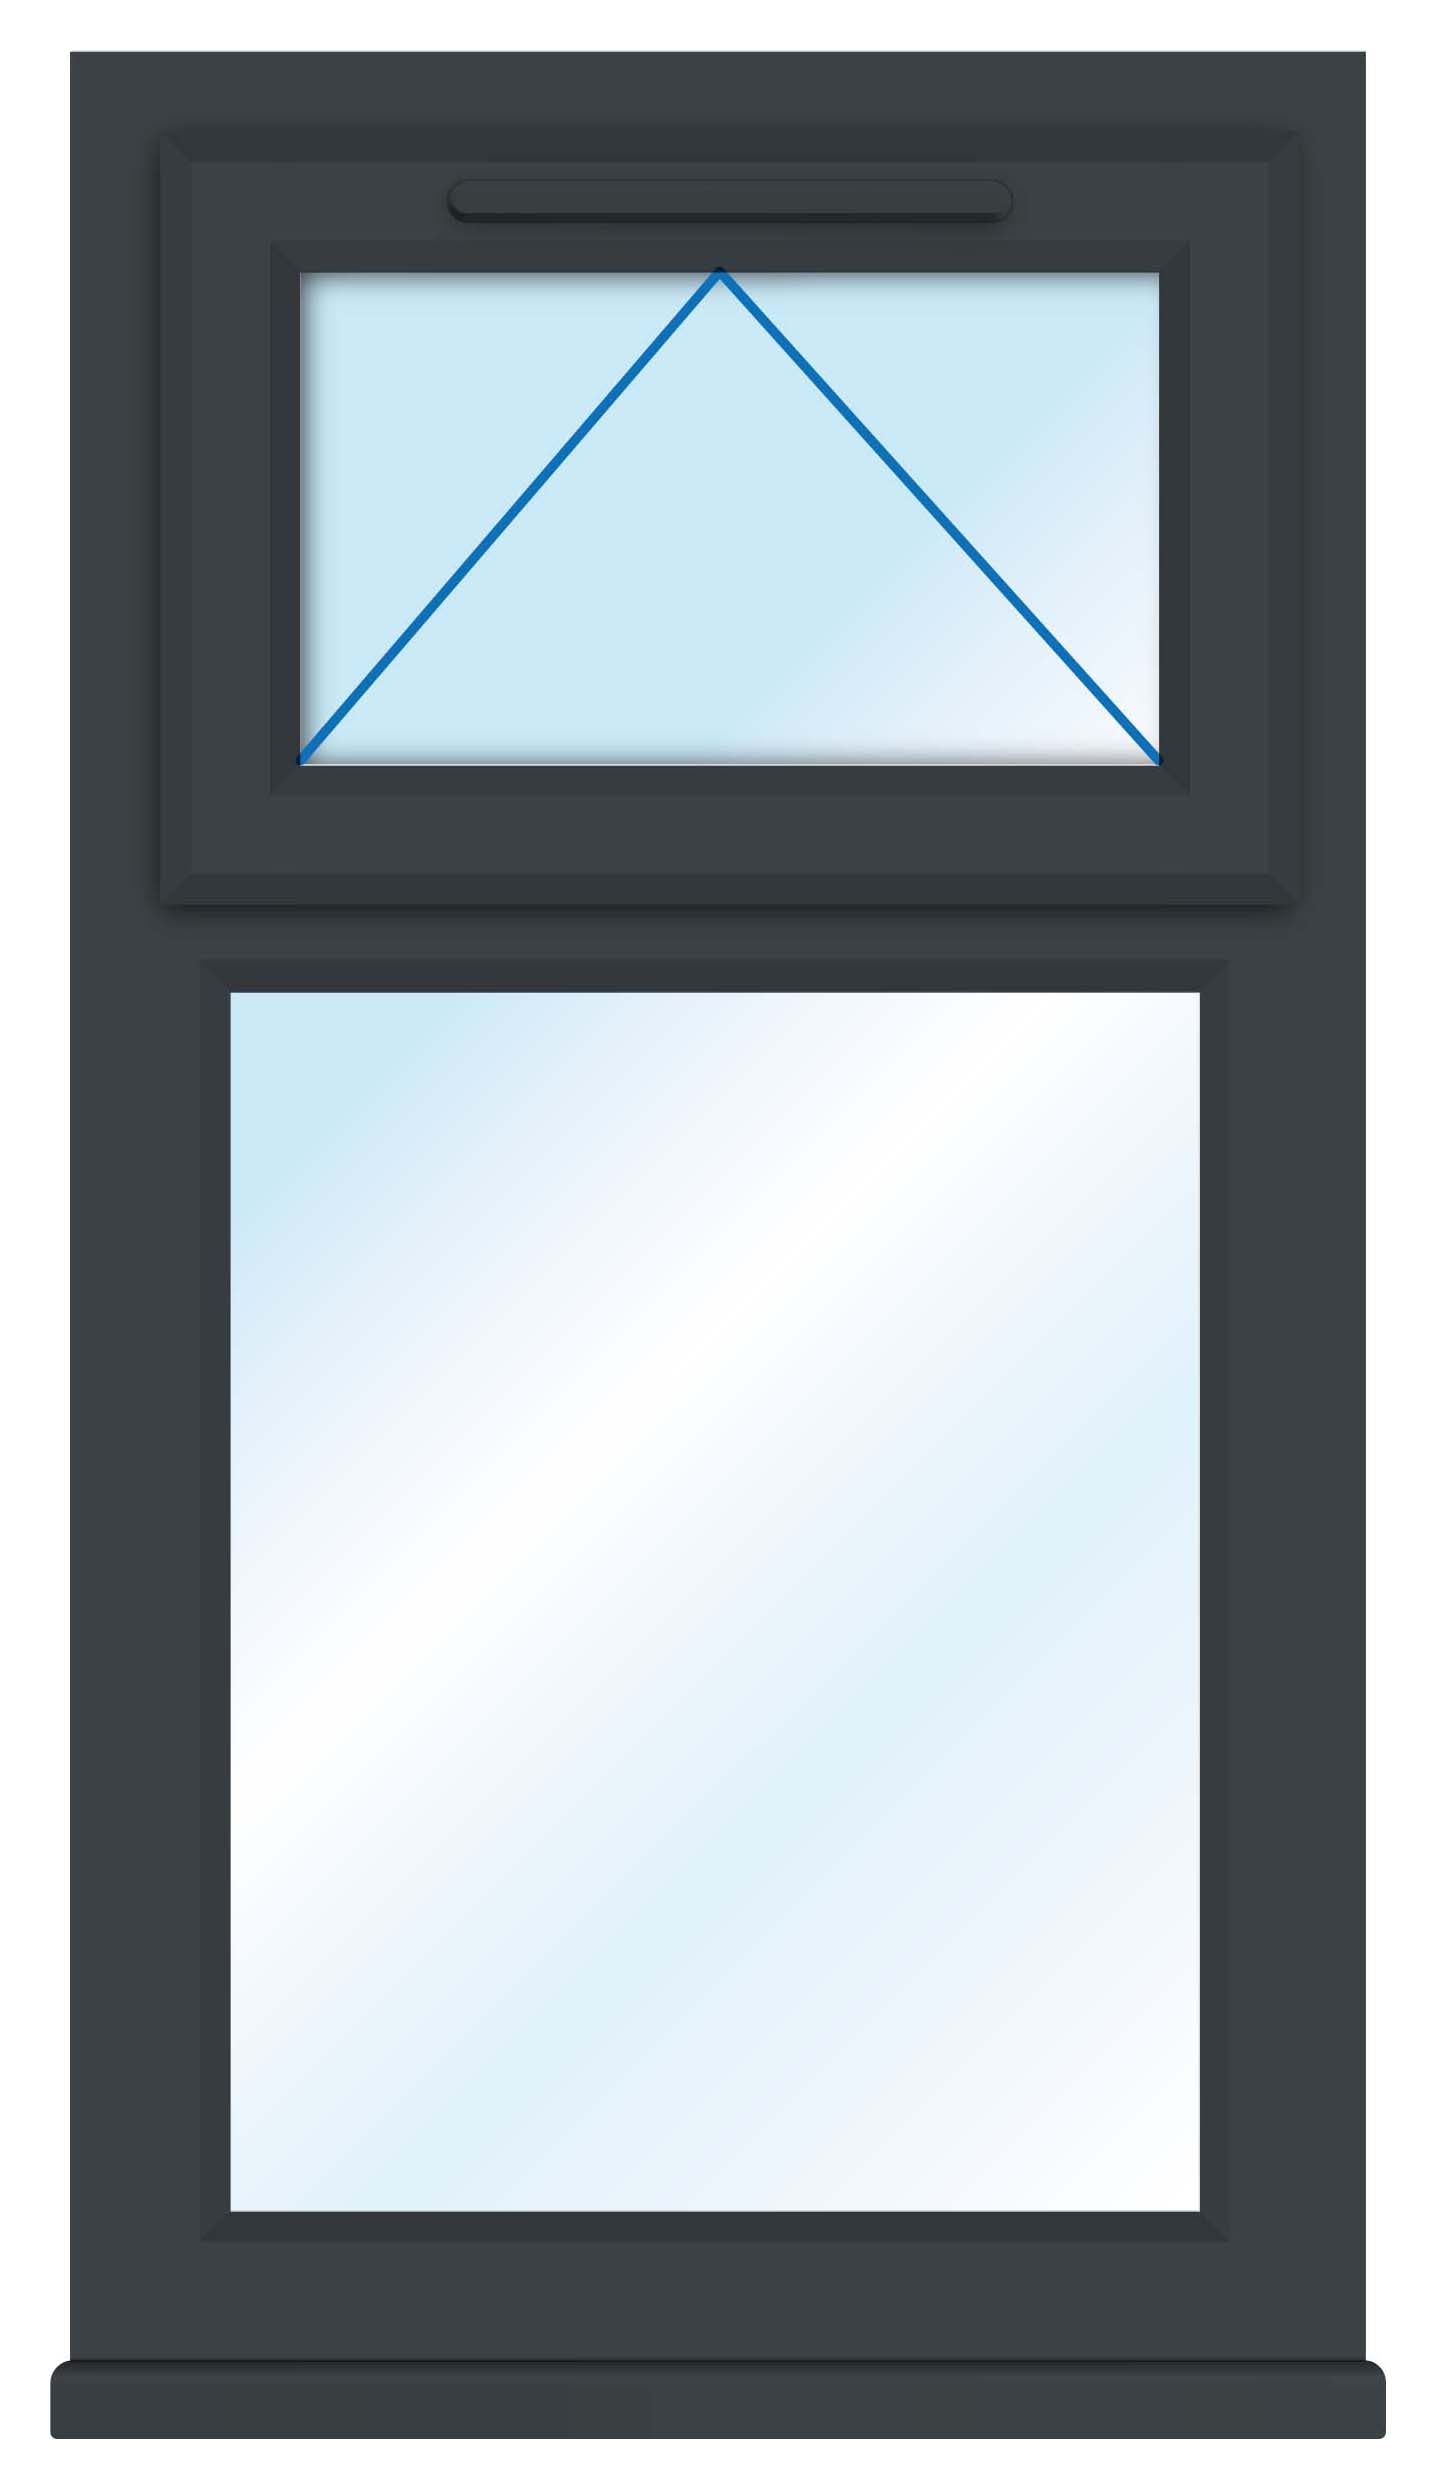 Image of Euramax uPVC Grey Top Hung Obscure Glass Casement Window - 610 x 1010mm